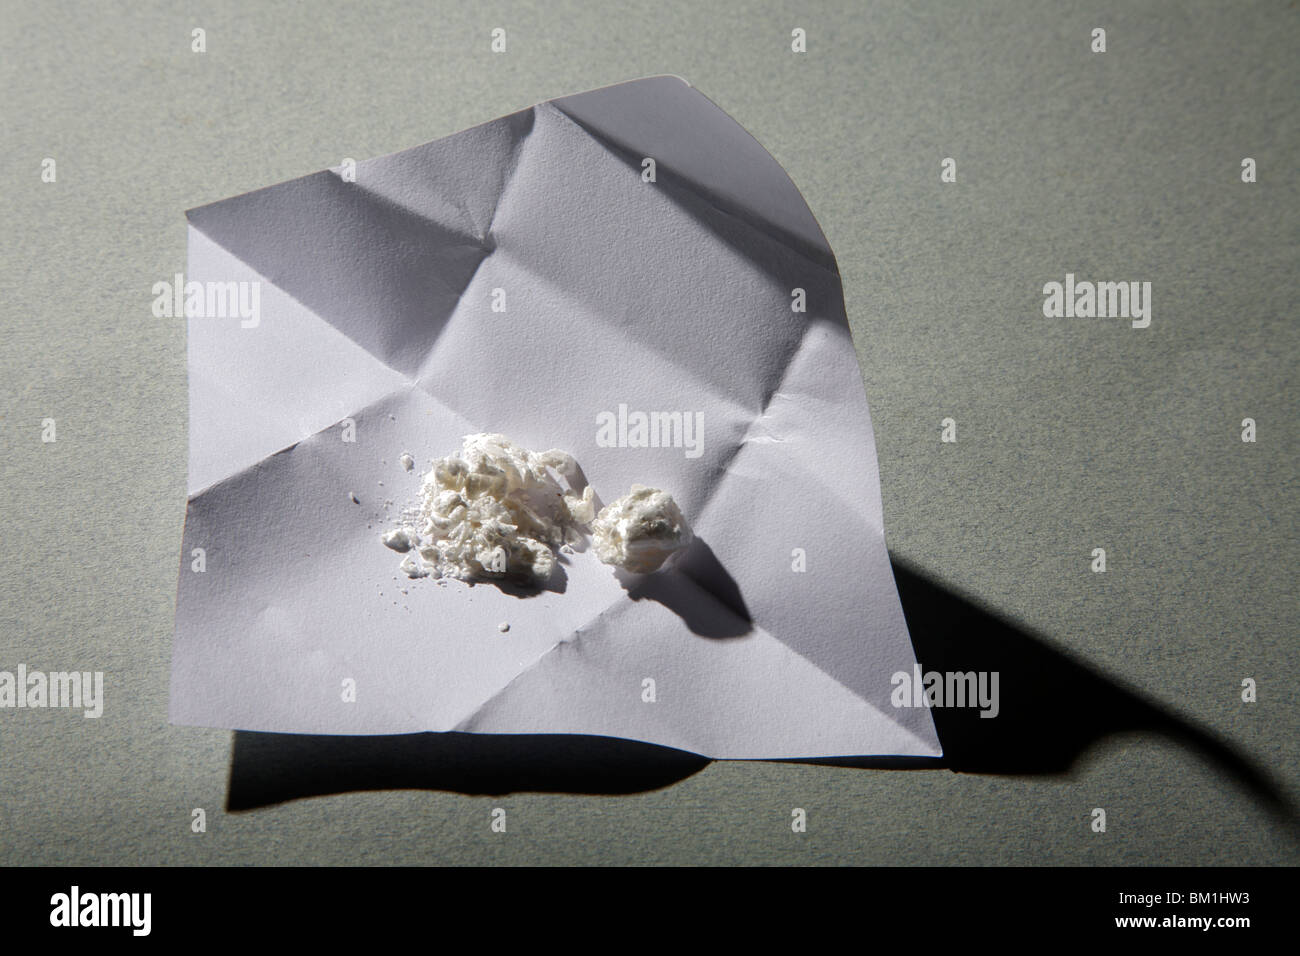 An opened one gram wrap of cocaine. Stock Photo